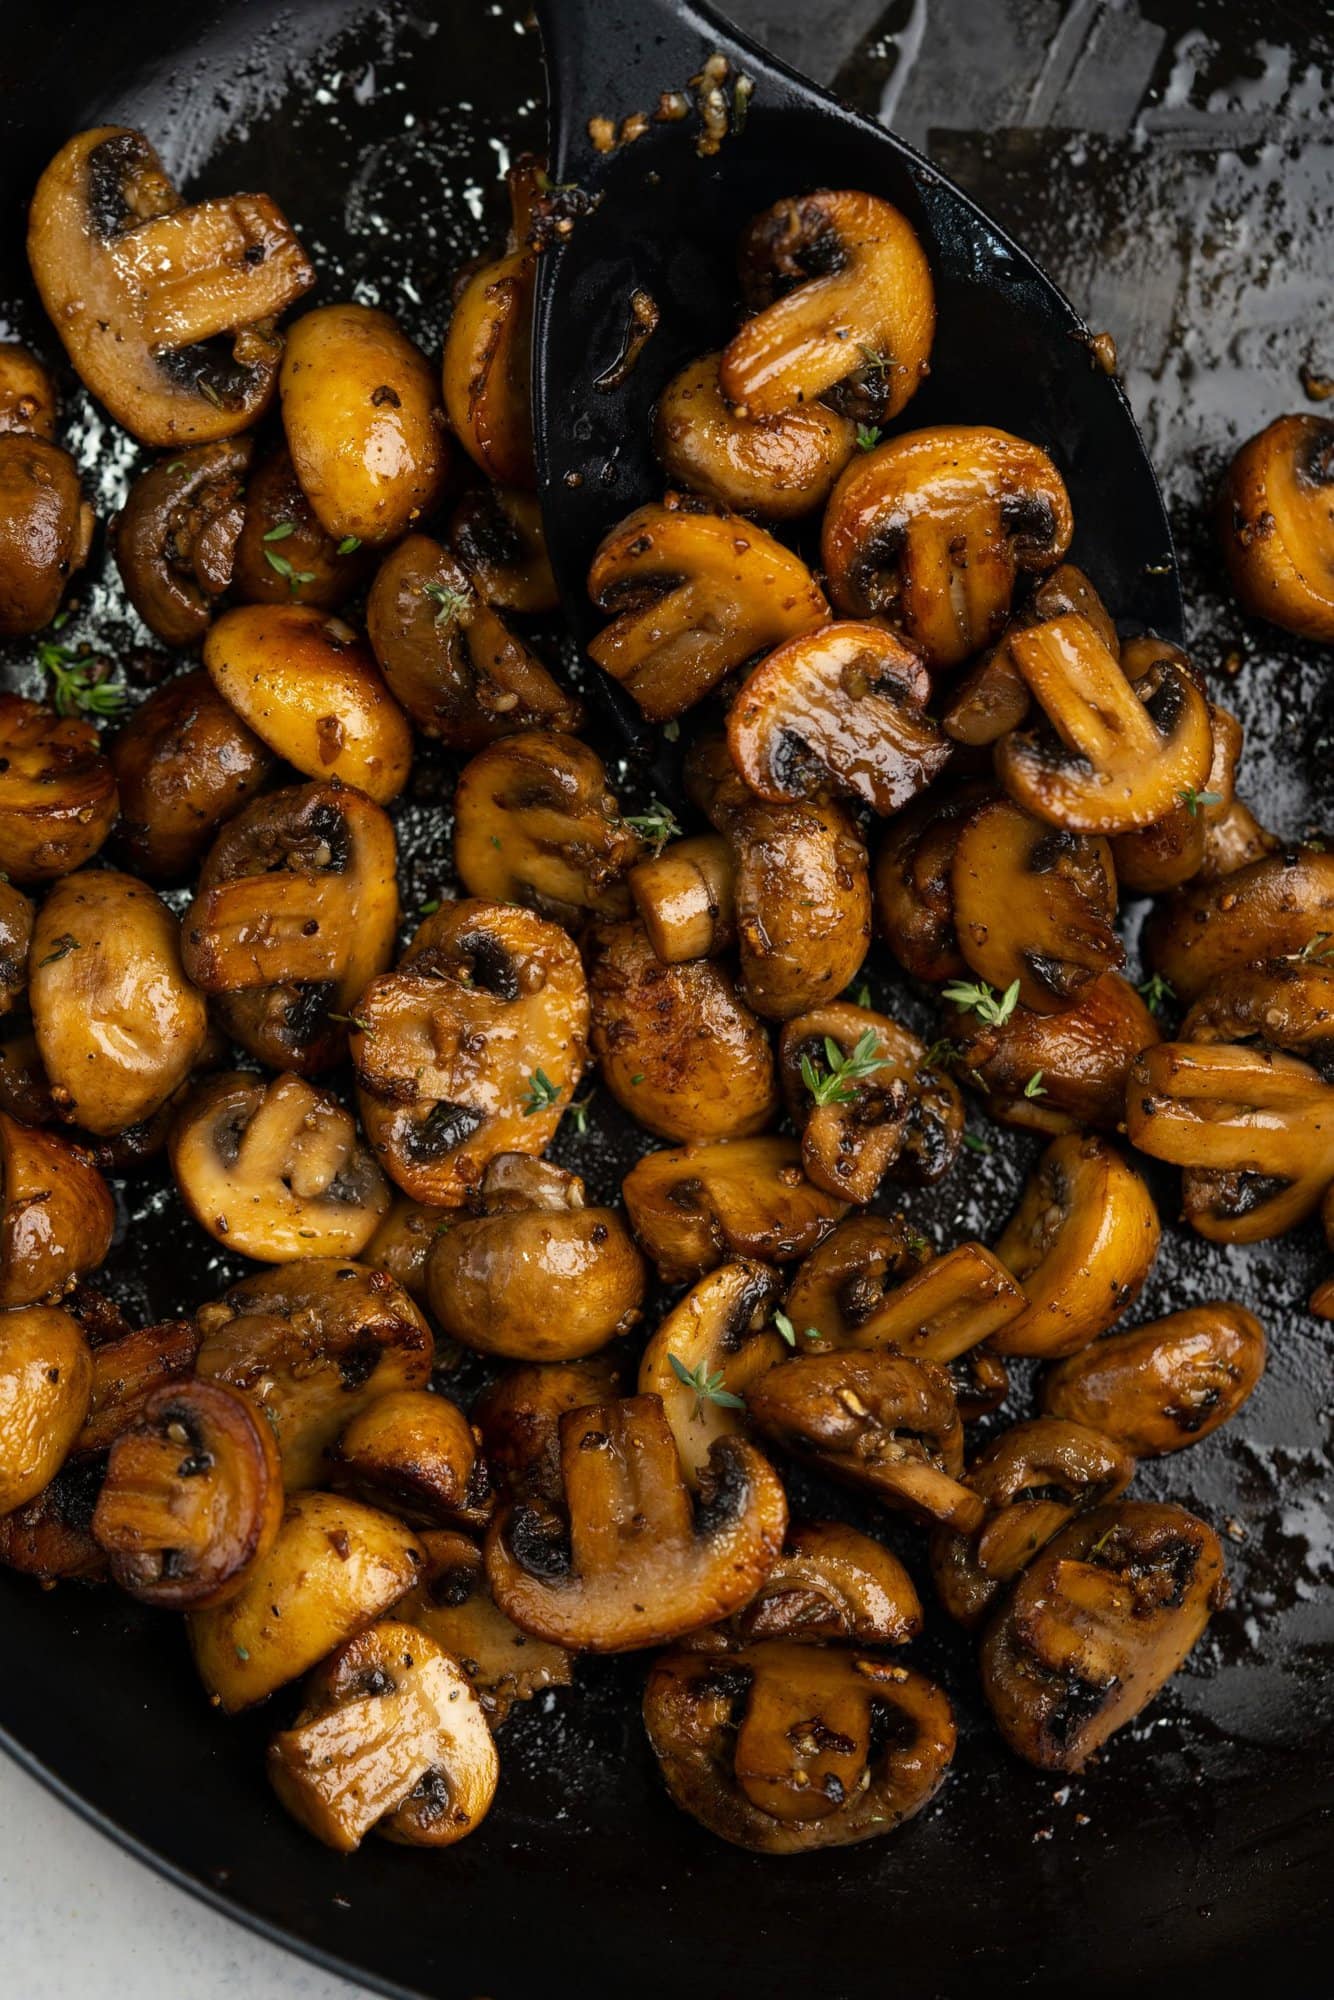 Laddle full of of butter and garlic glazed mushrooms in a skillet